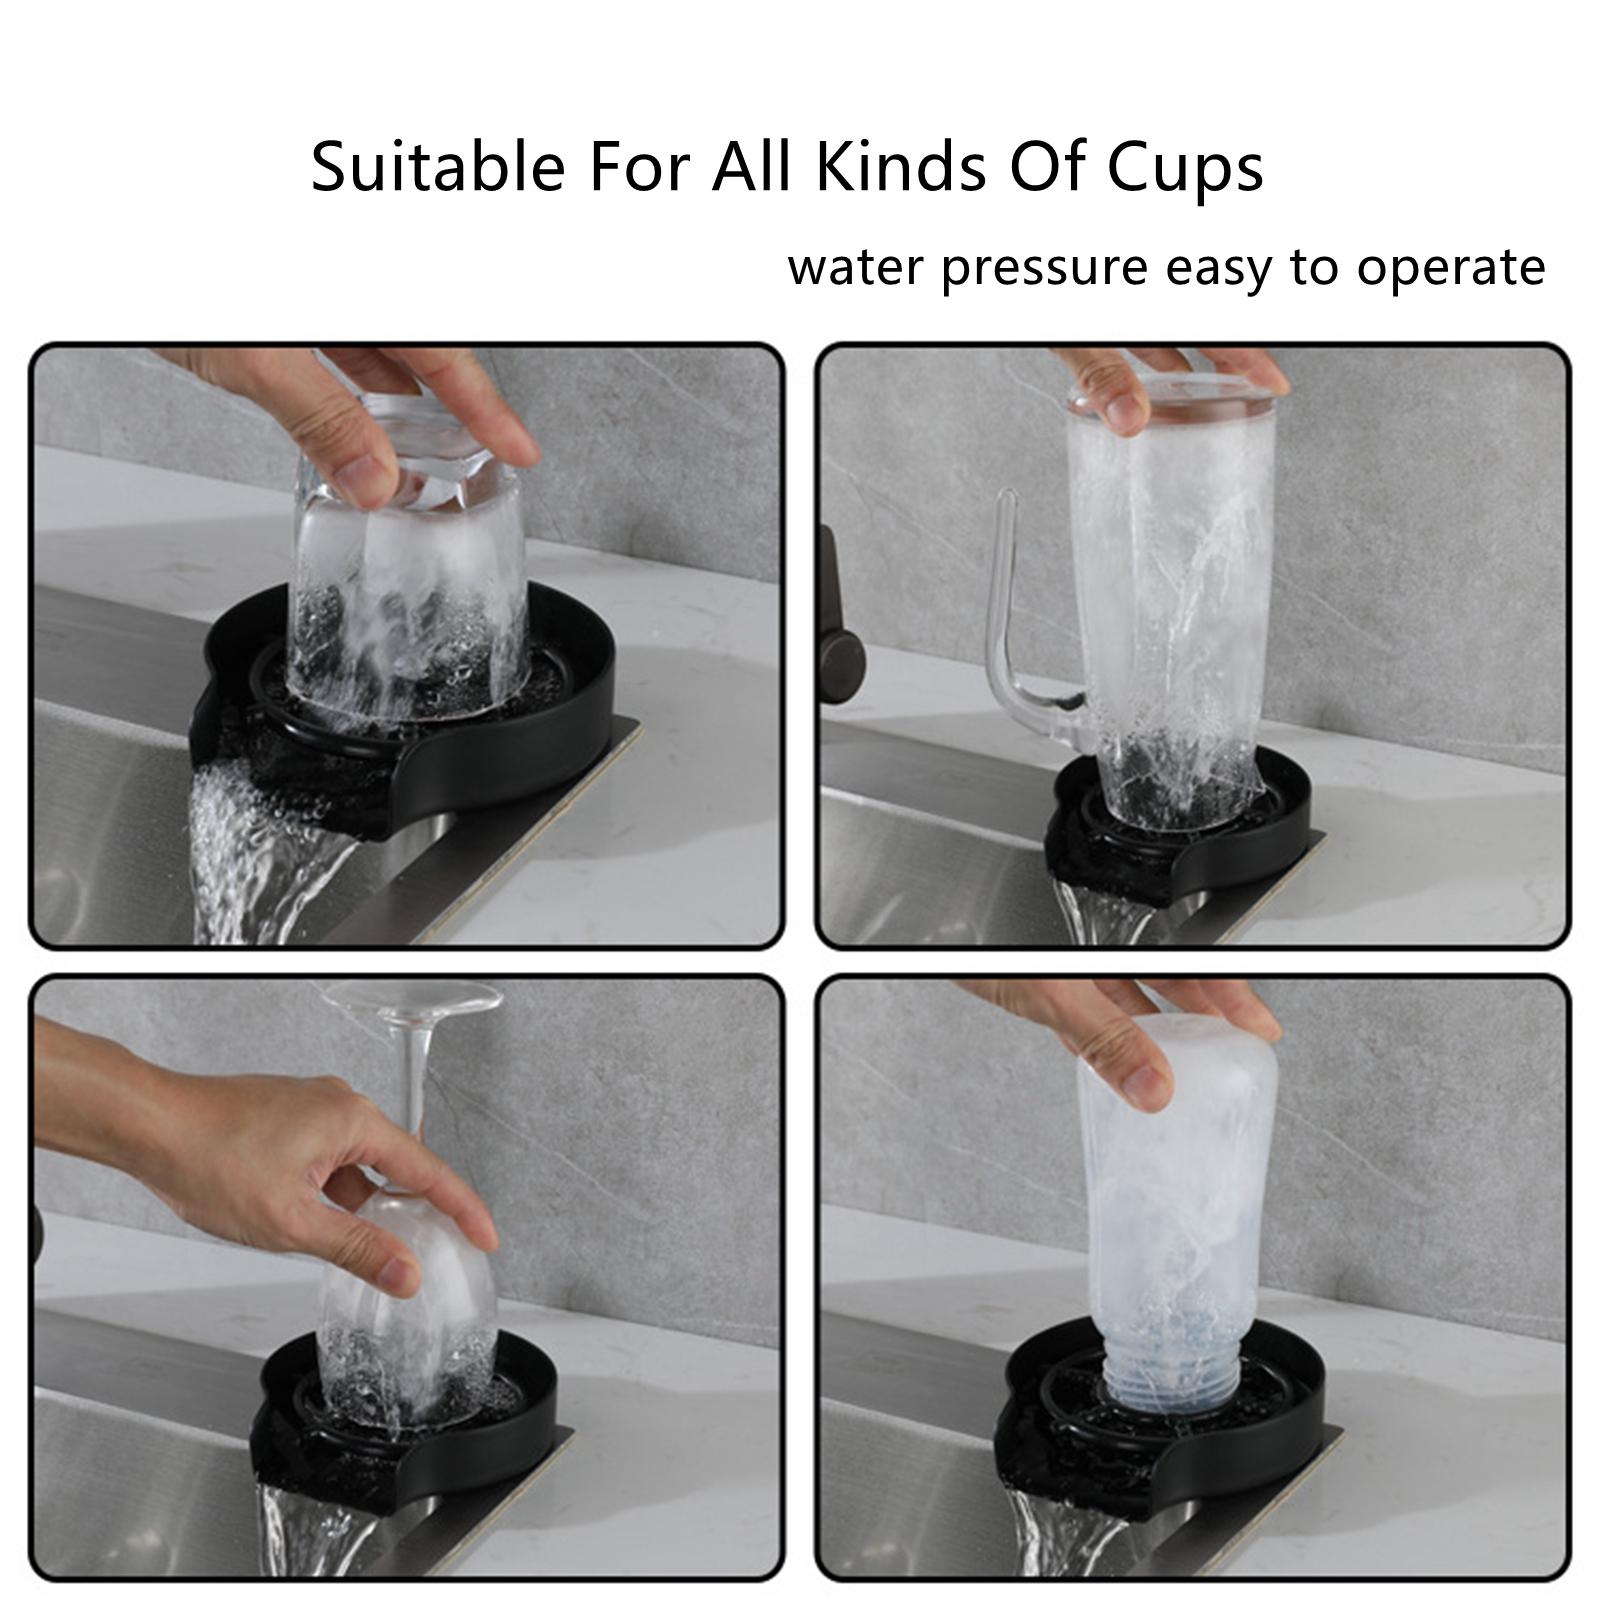 Plastic Faucet Cup Rinser Pitcher Hotel Cup Washer set 4